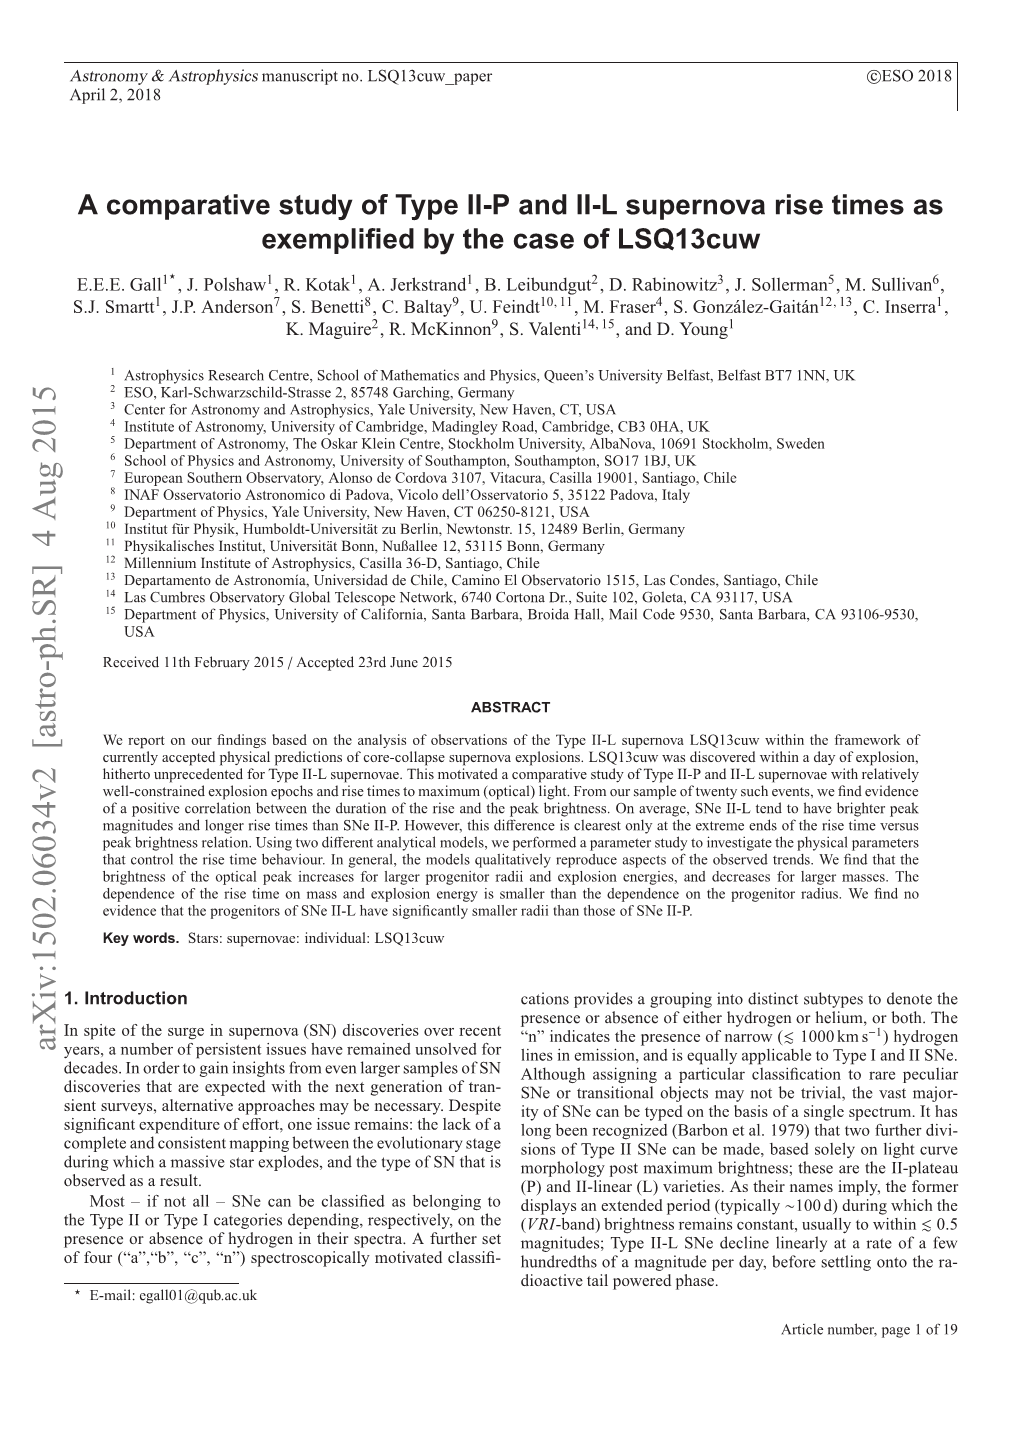 A Comparative Study of Type II-P and II-L Supernova Rise Times As Exempliﬁed by the Case of Lsq13cuw